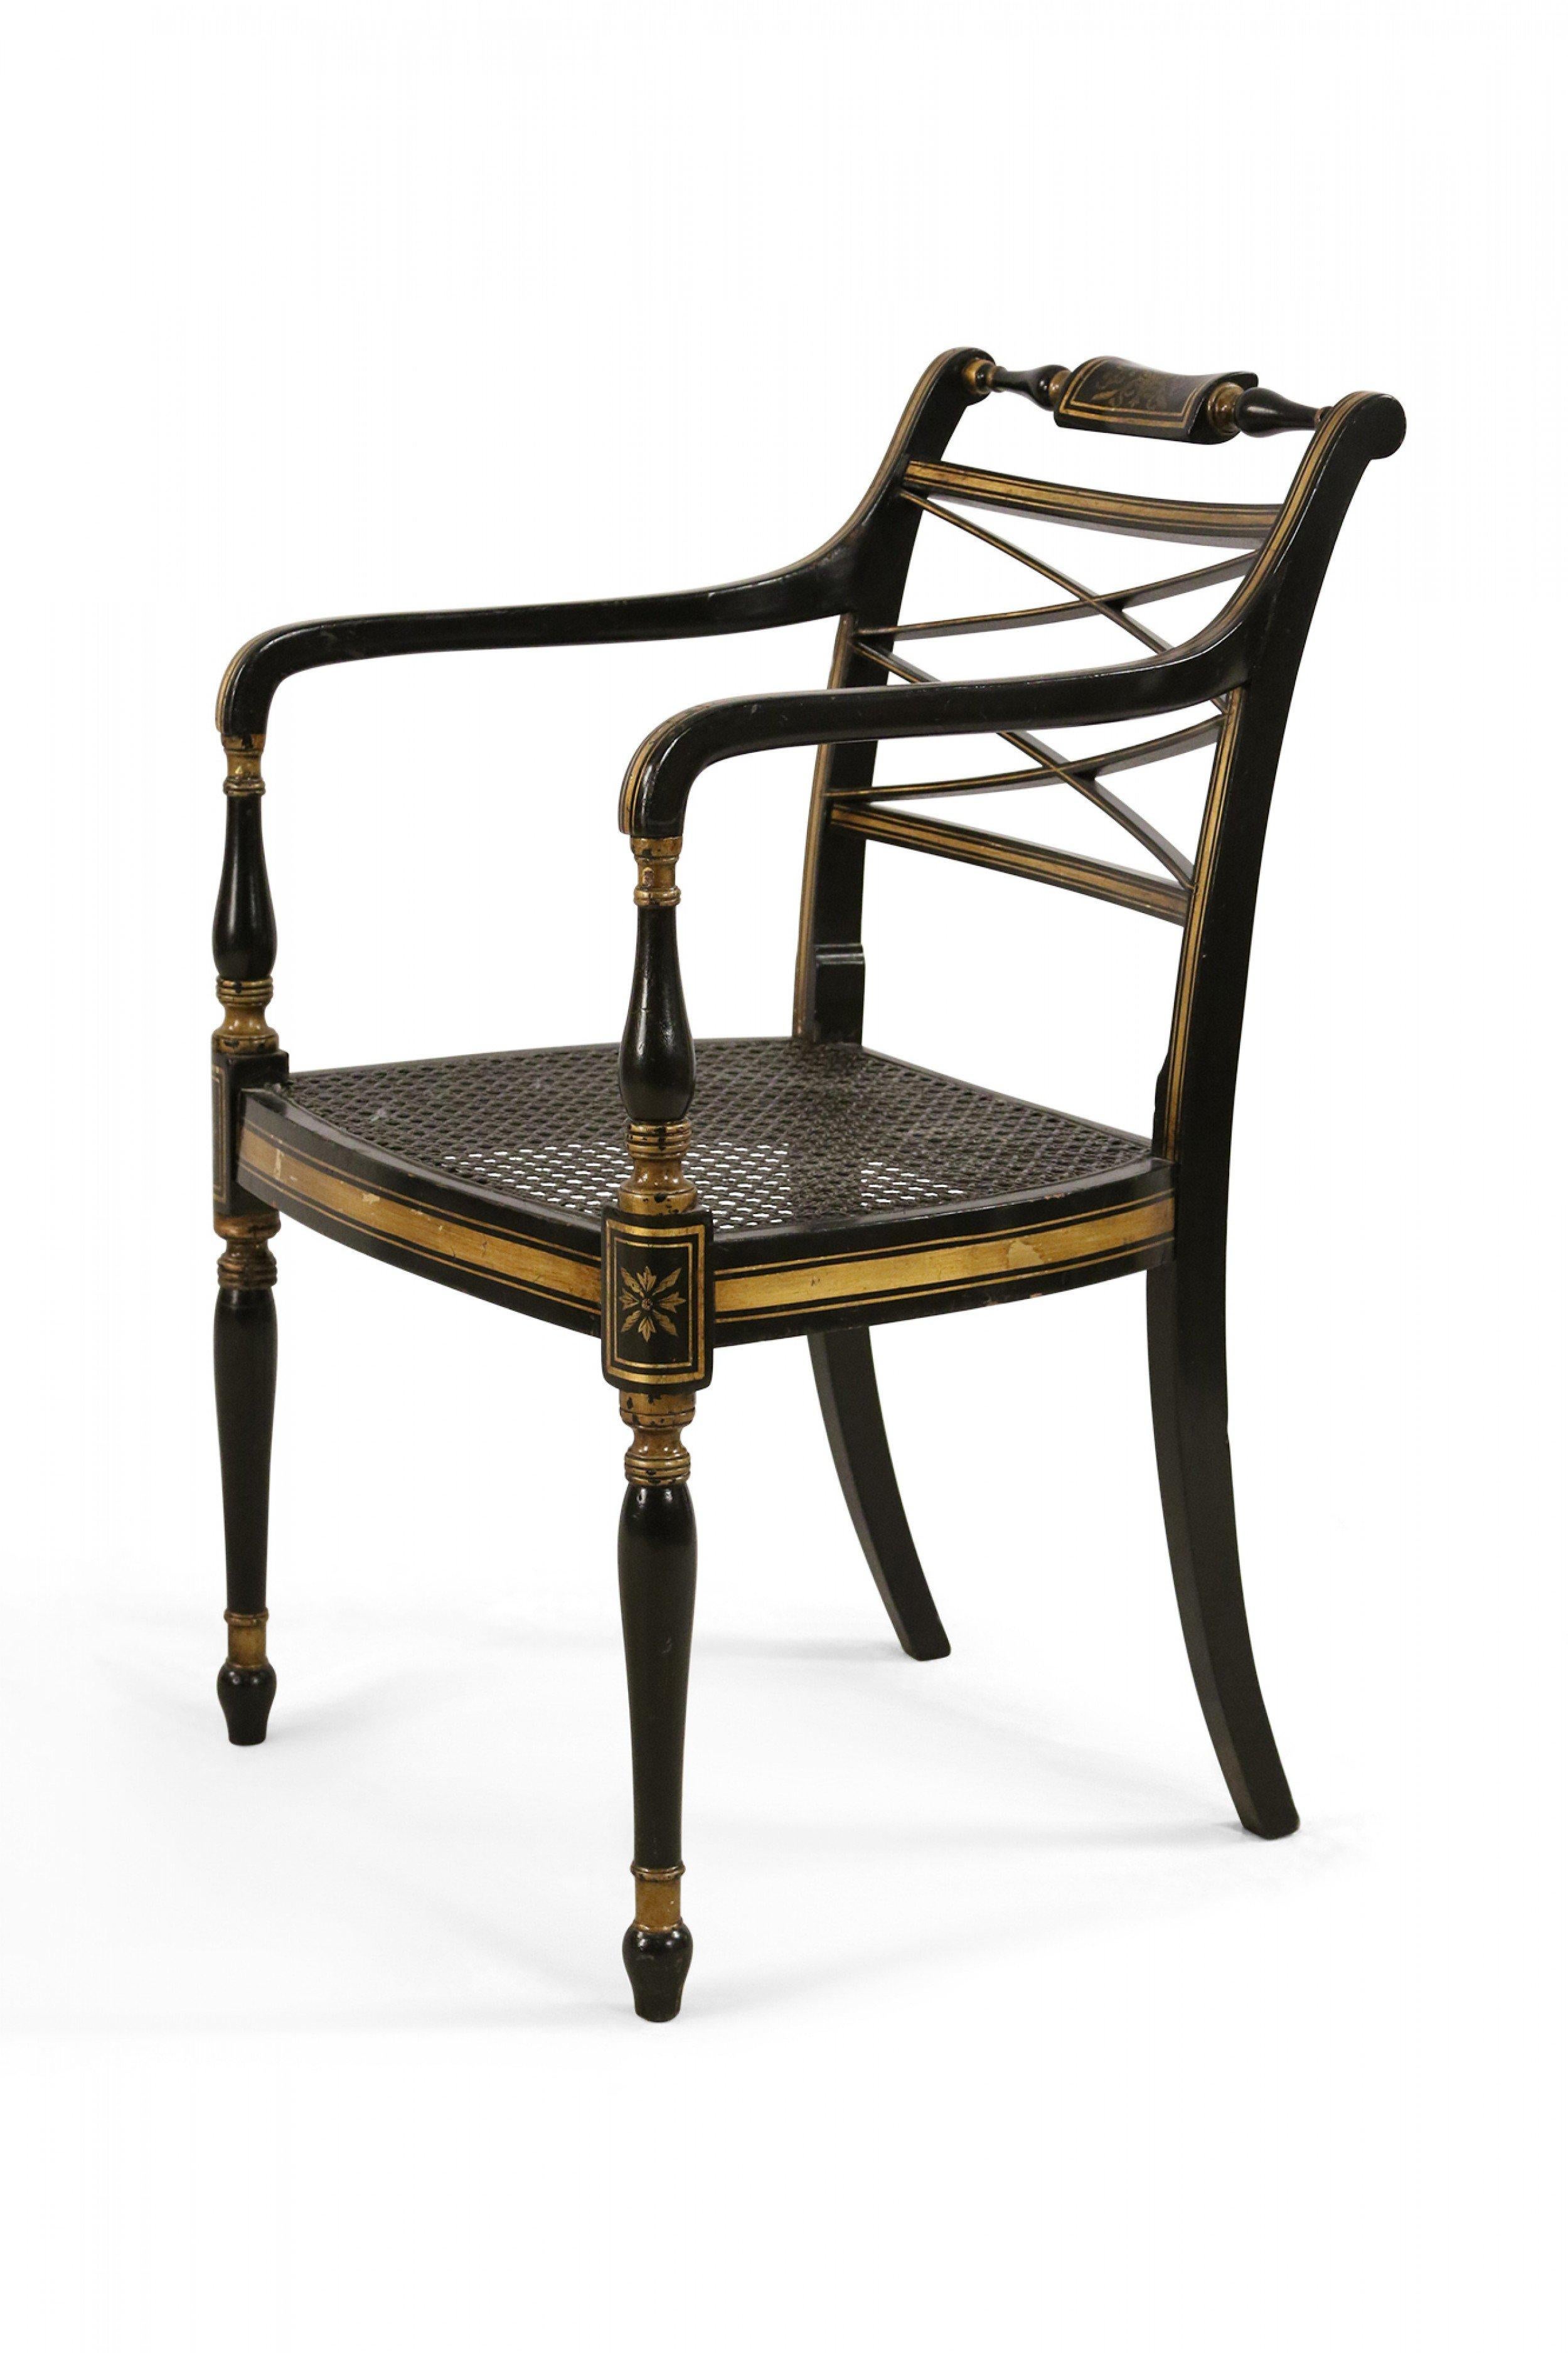 English Regency Style Black and Gold Painted Cane Seat Side Chair For Sale 3